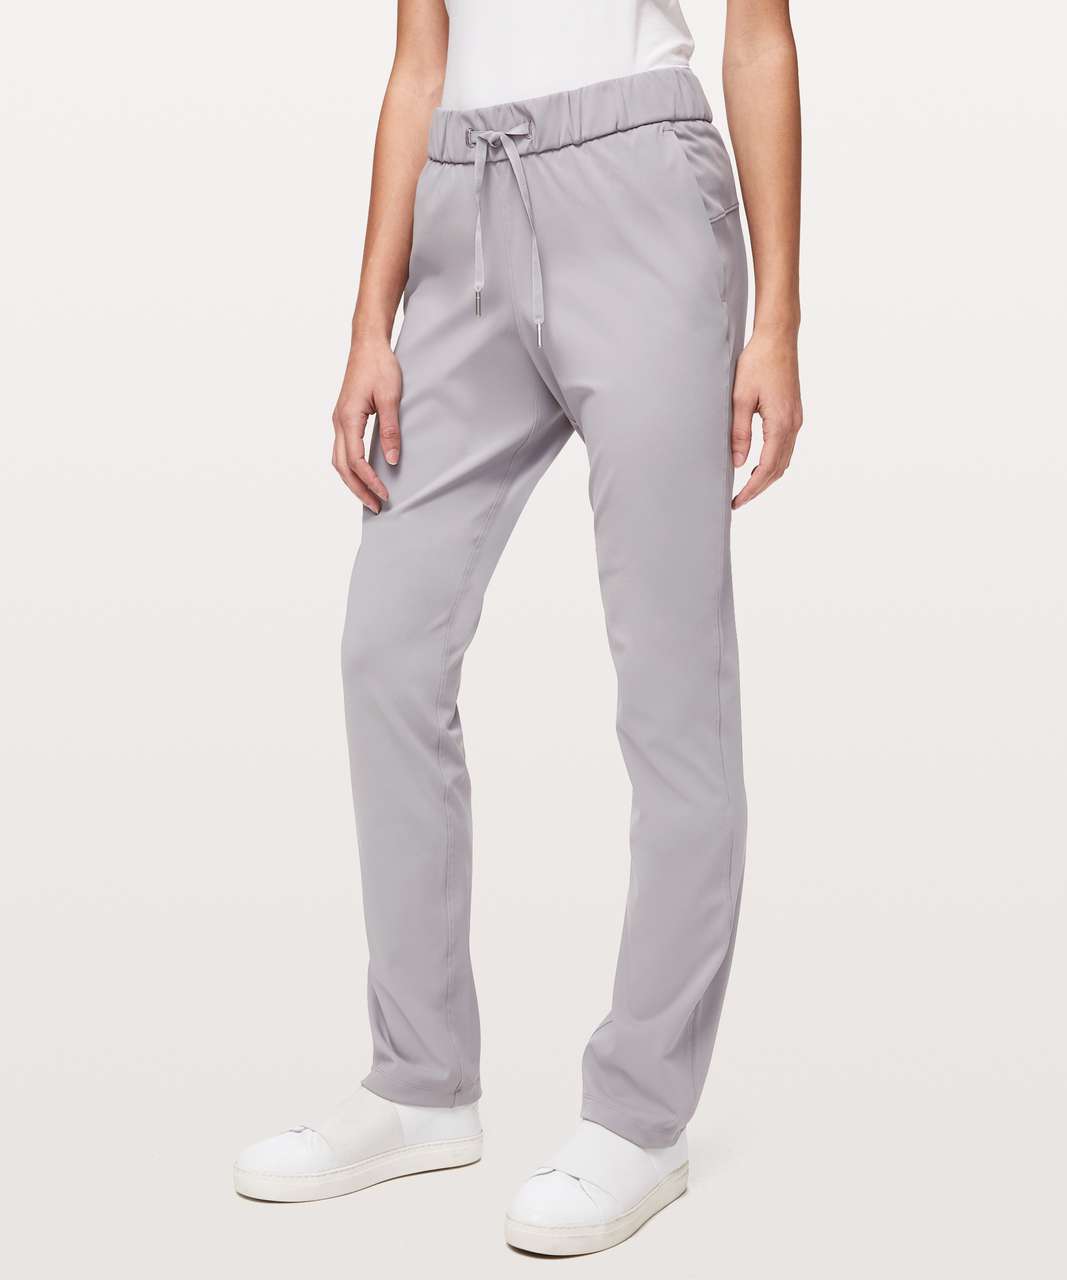 Lululemon On the Fly Pant Tall - Silverscreen